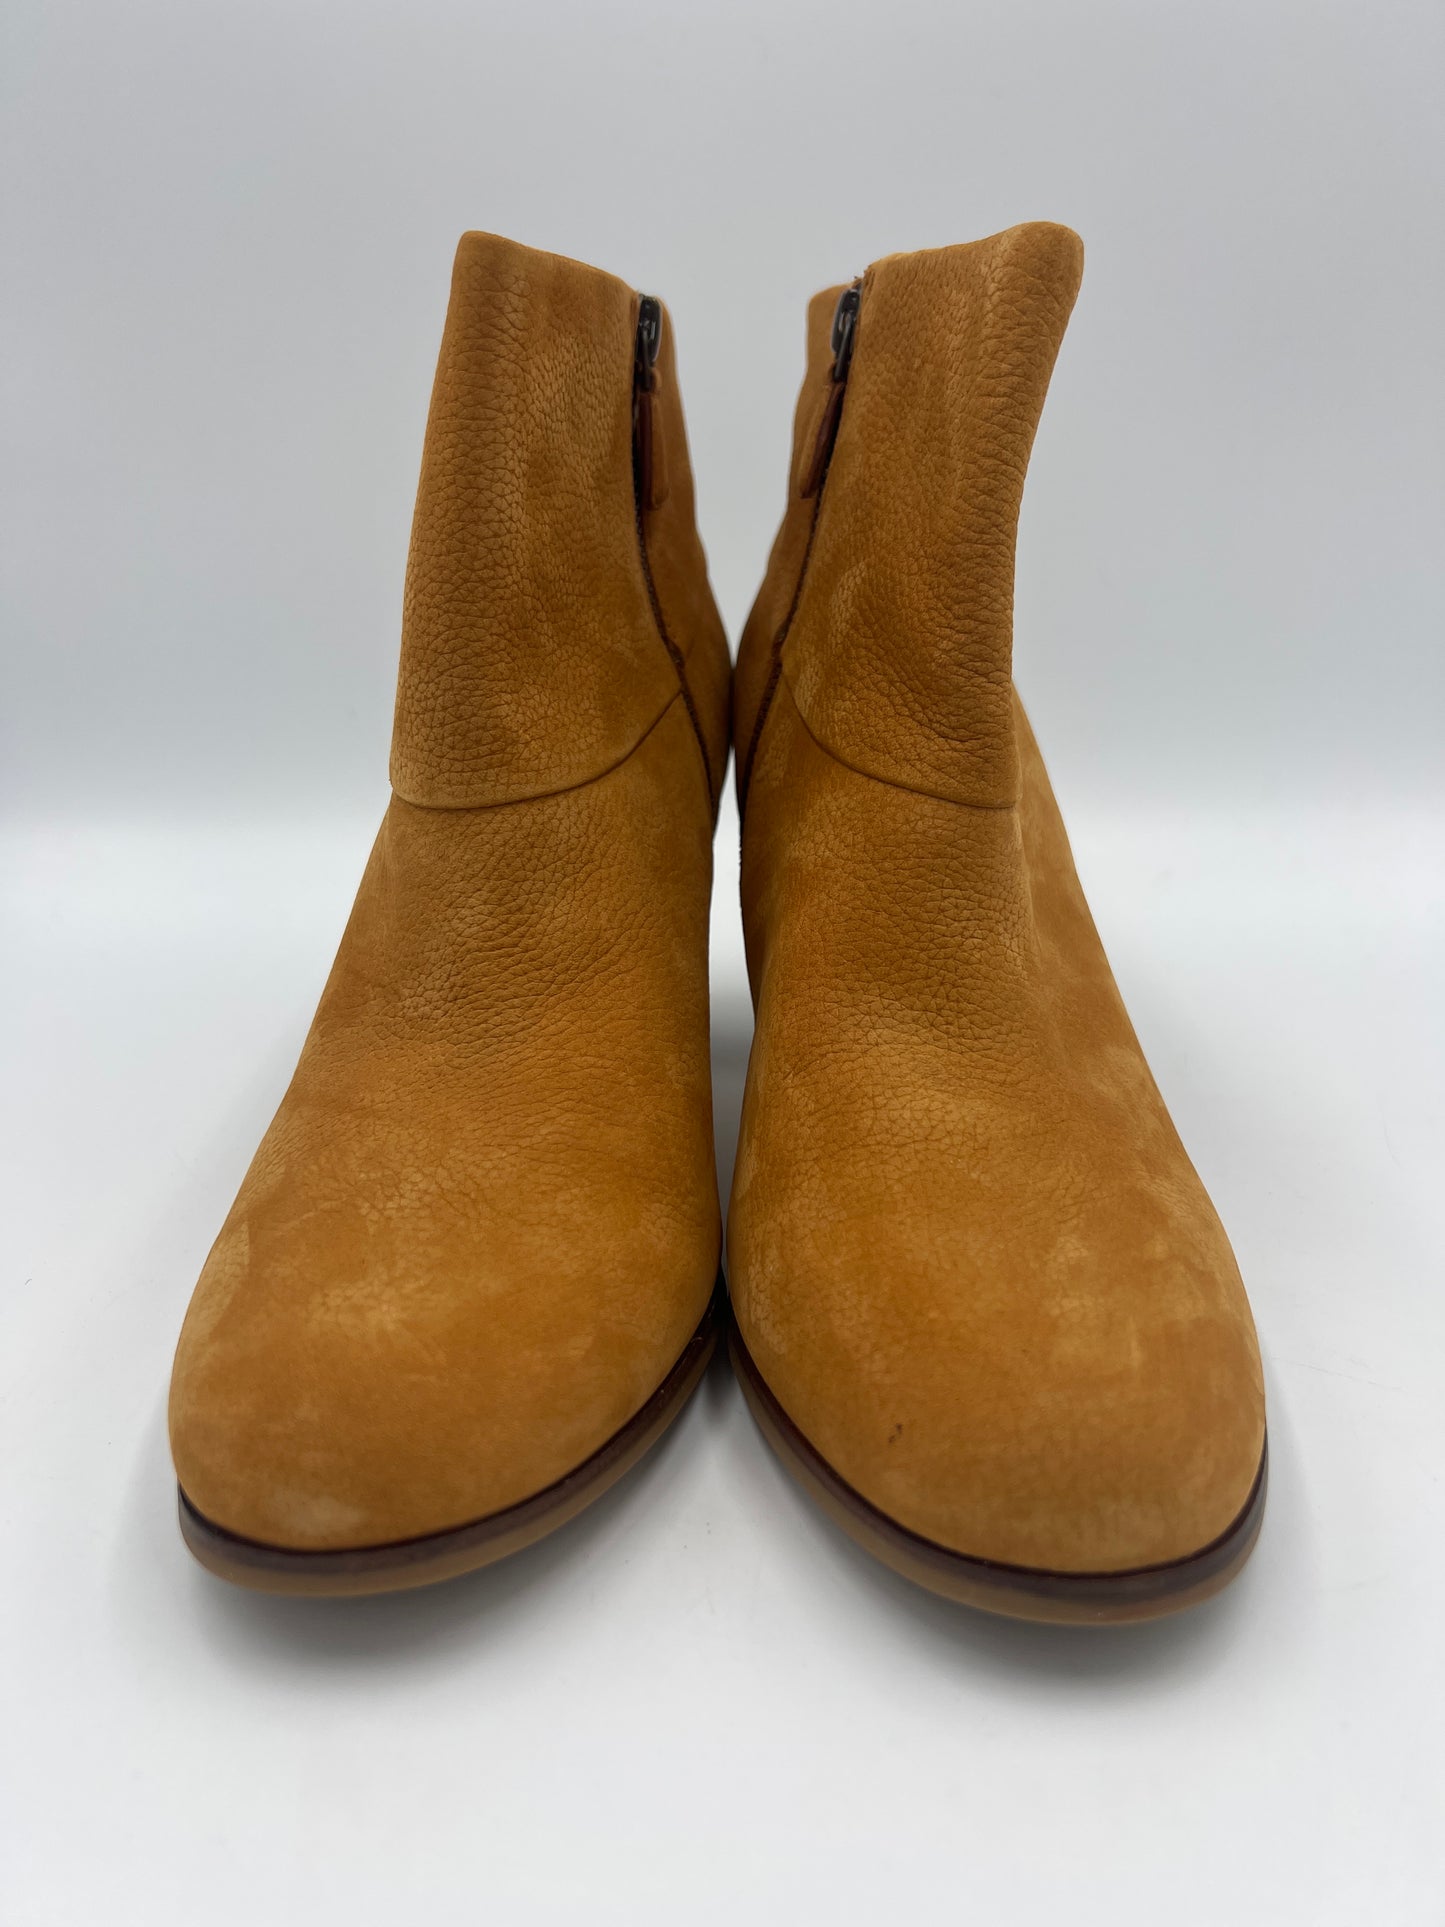 New! Boots Designer By Cole-haan  Size: 10.5